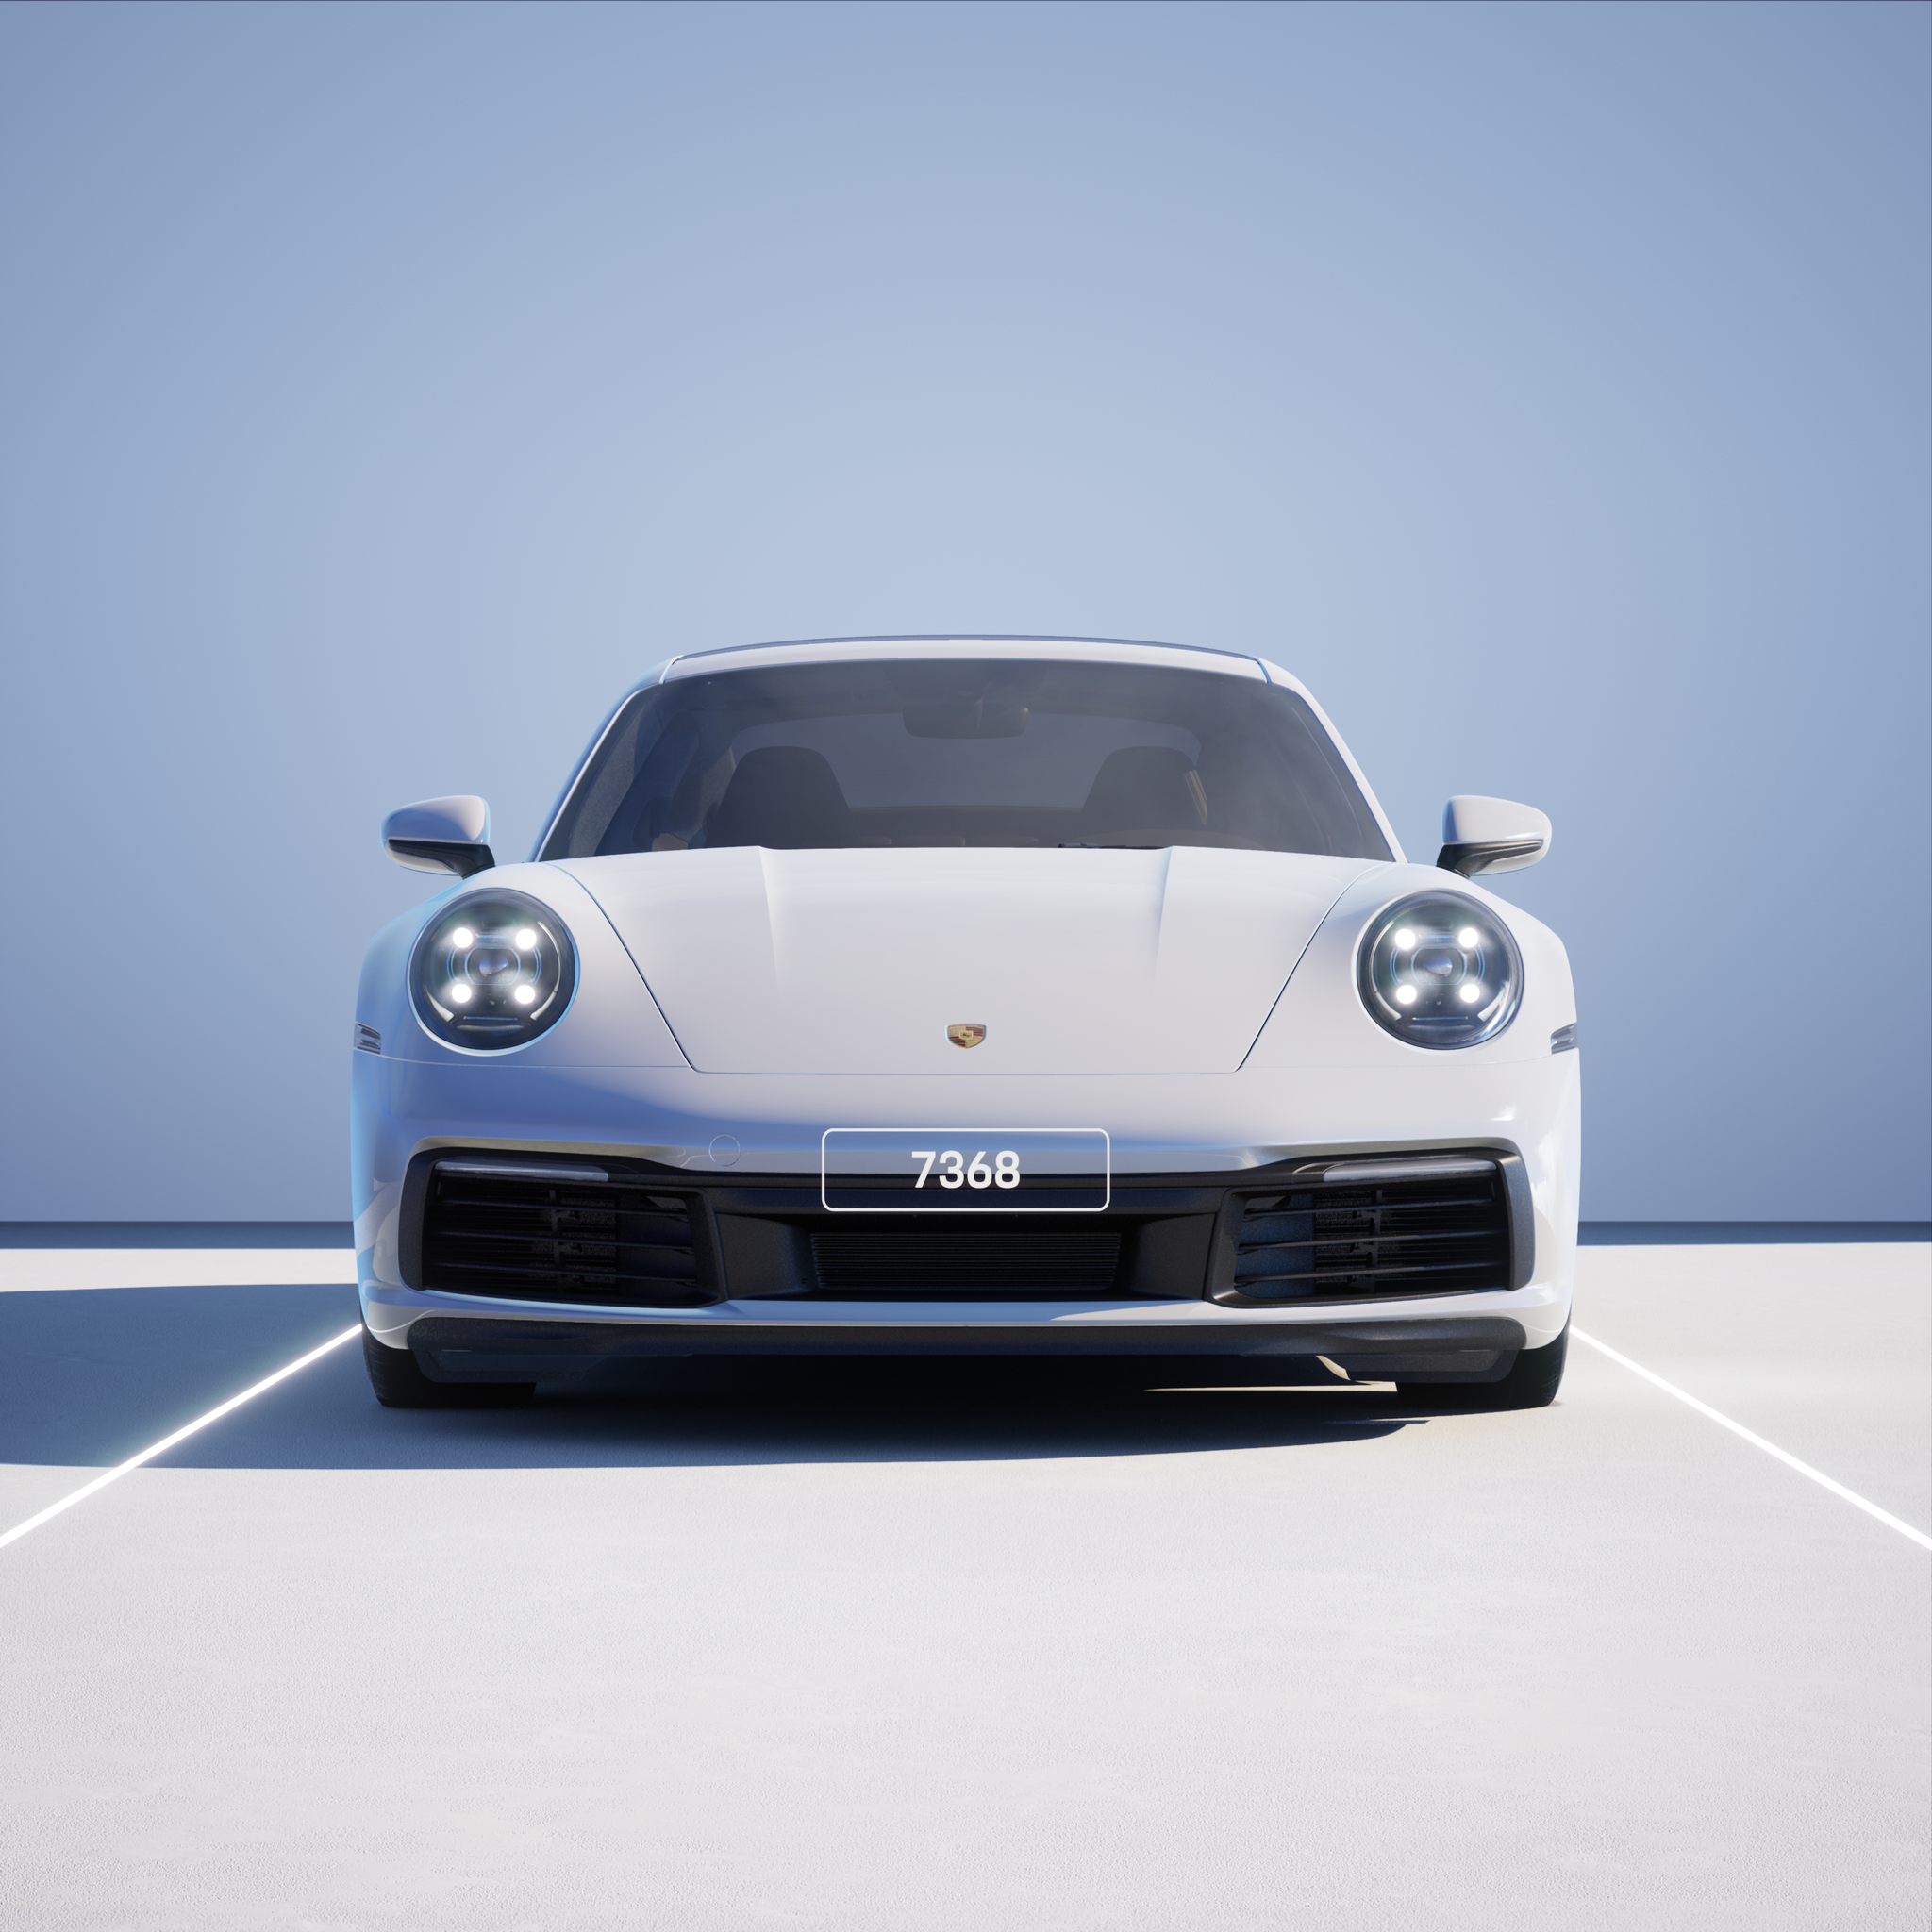 The PORSCHΞ 911 7368 image in phase